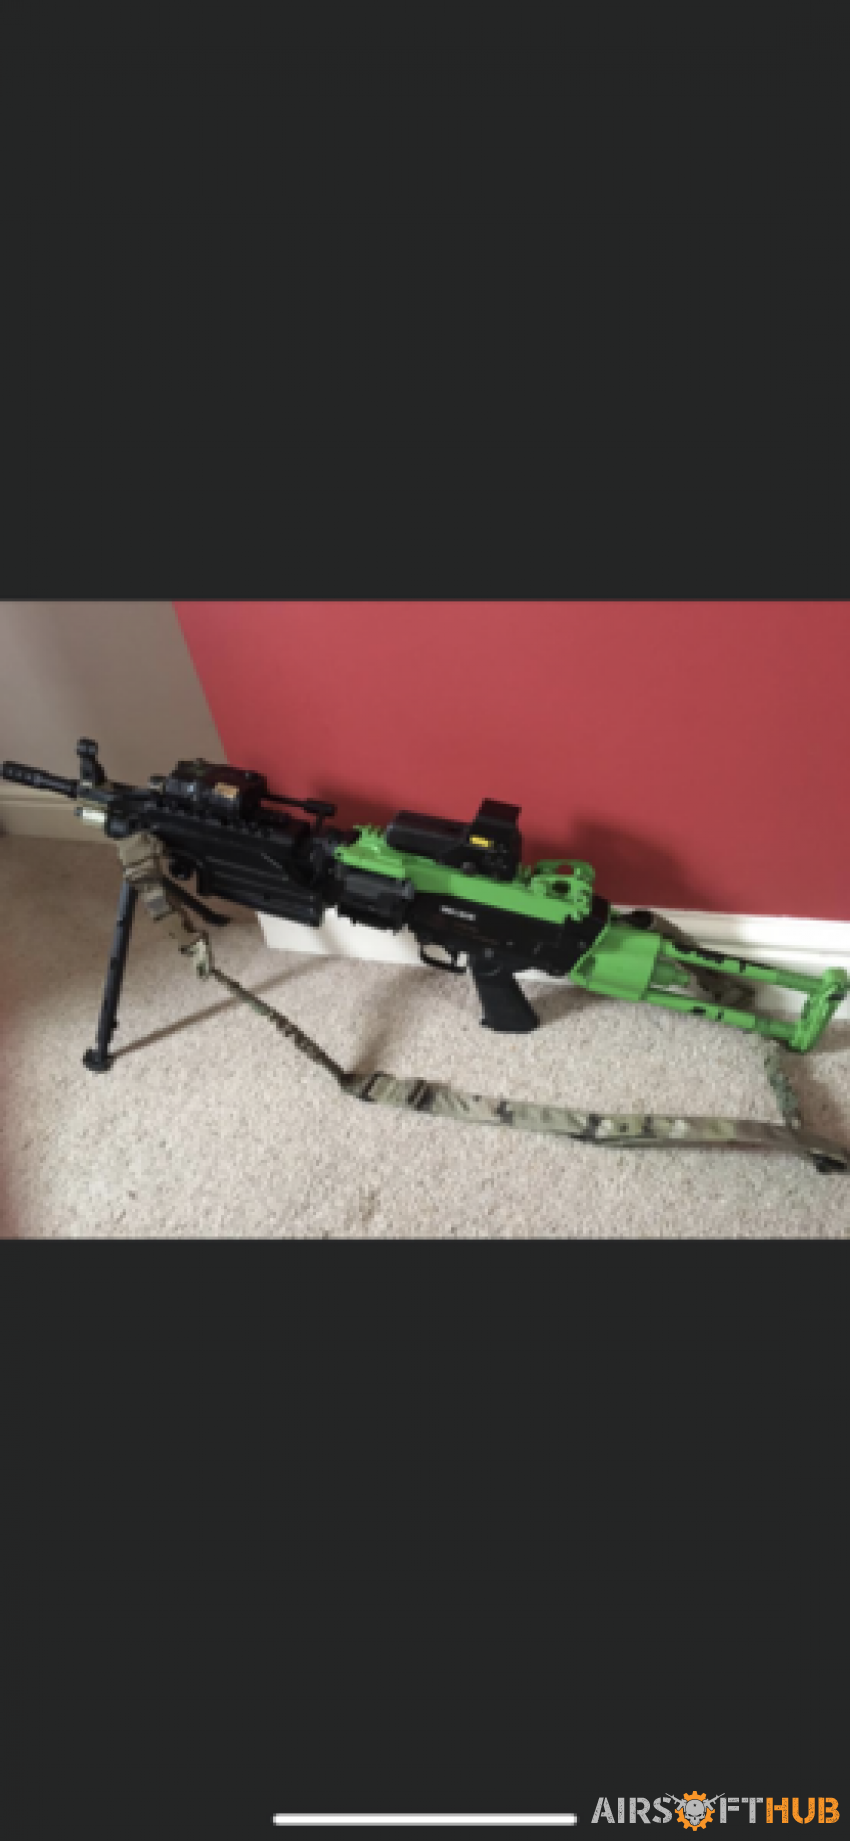 M249 saw a&k - Used airsoft equipment